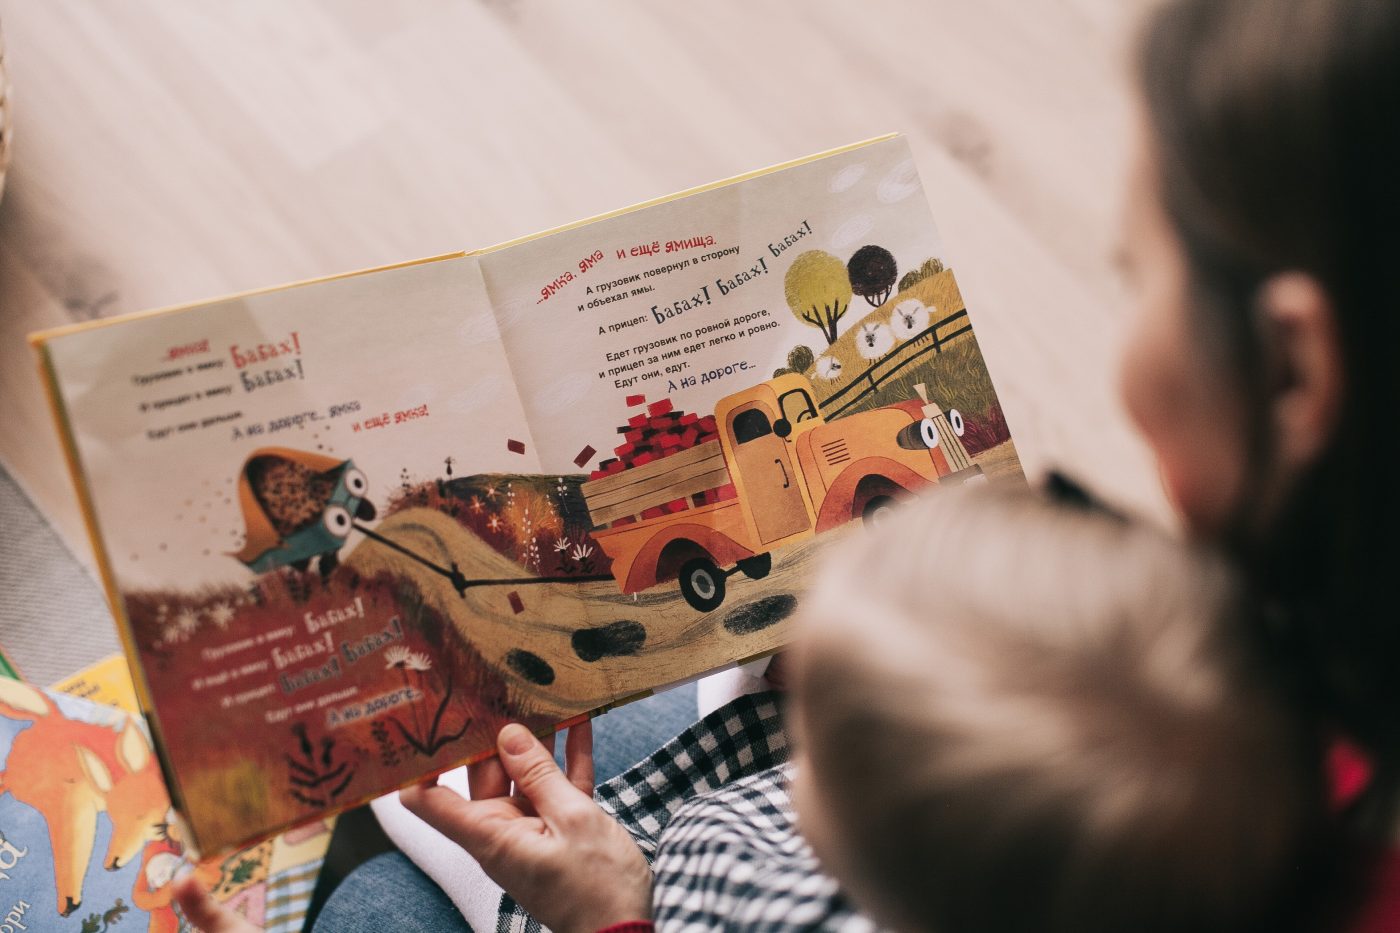 The question: What is the evidence of effectiveness of parent-child book reading with preschool children in improving school readiness and early language?